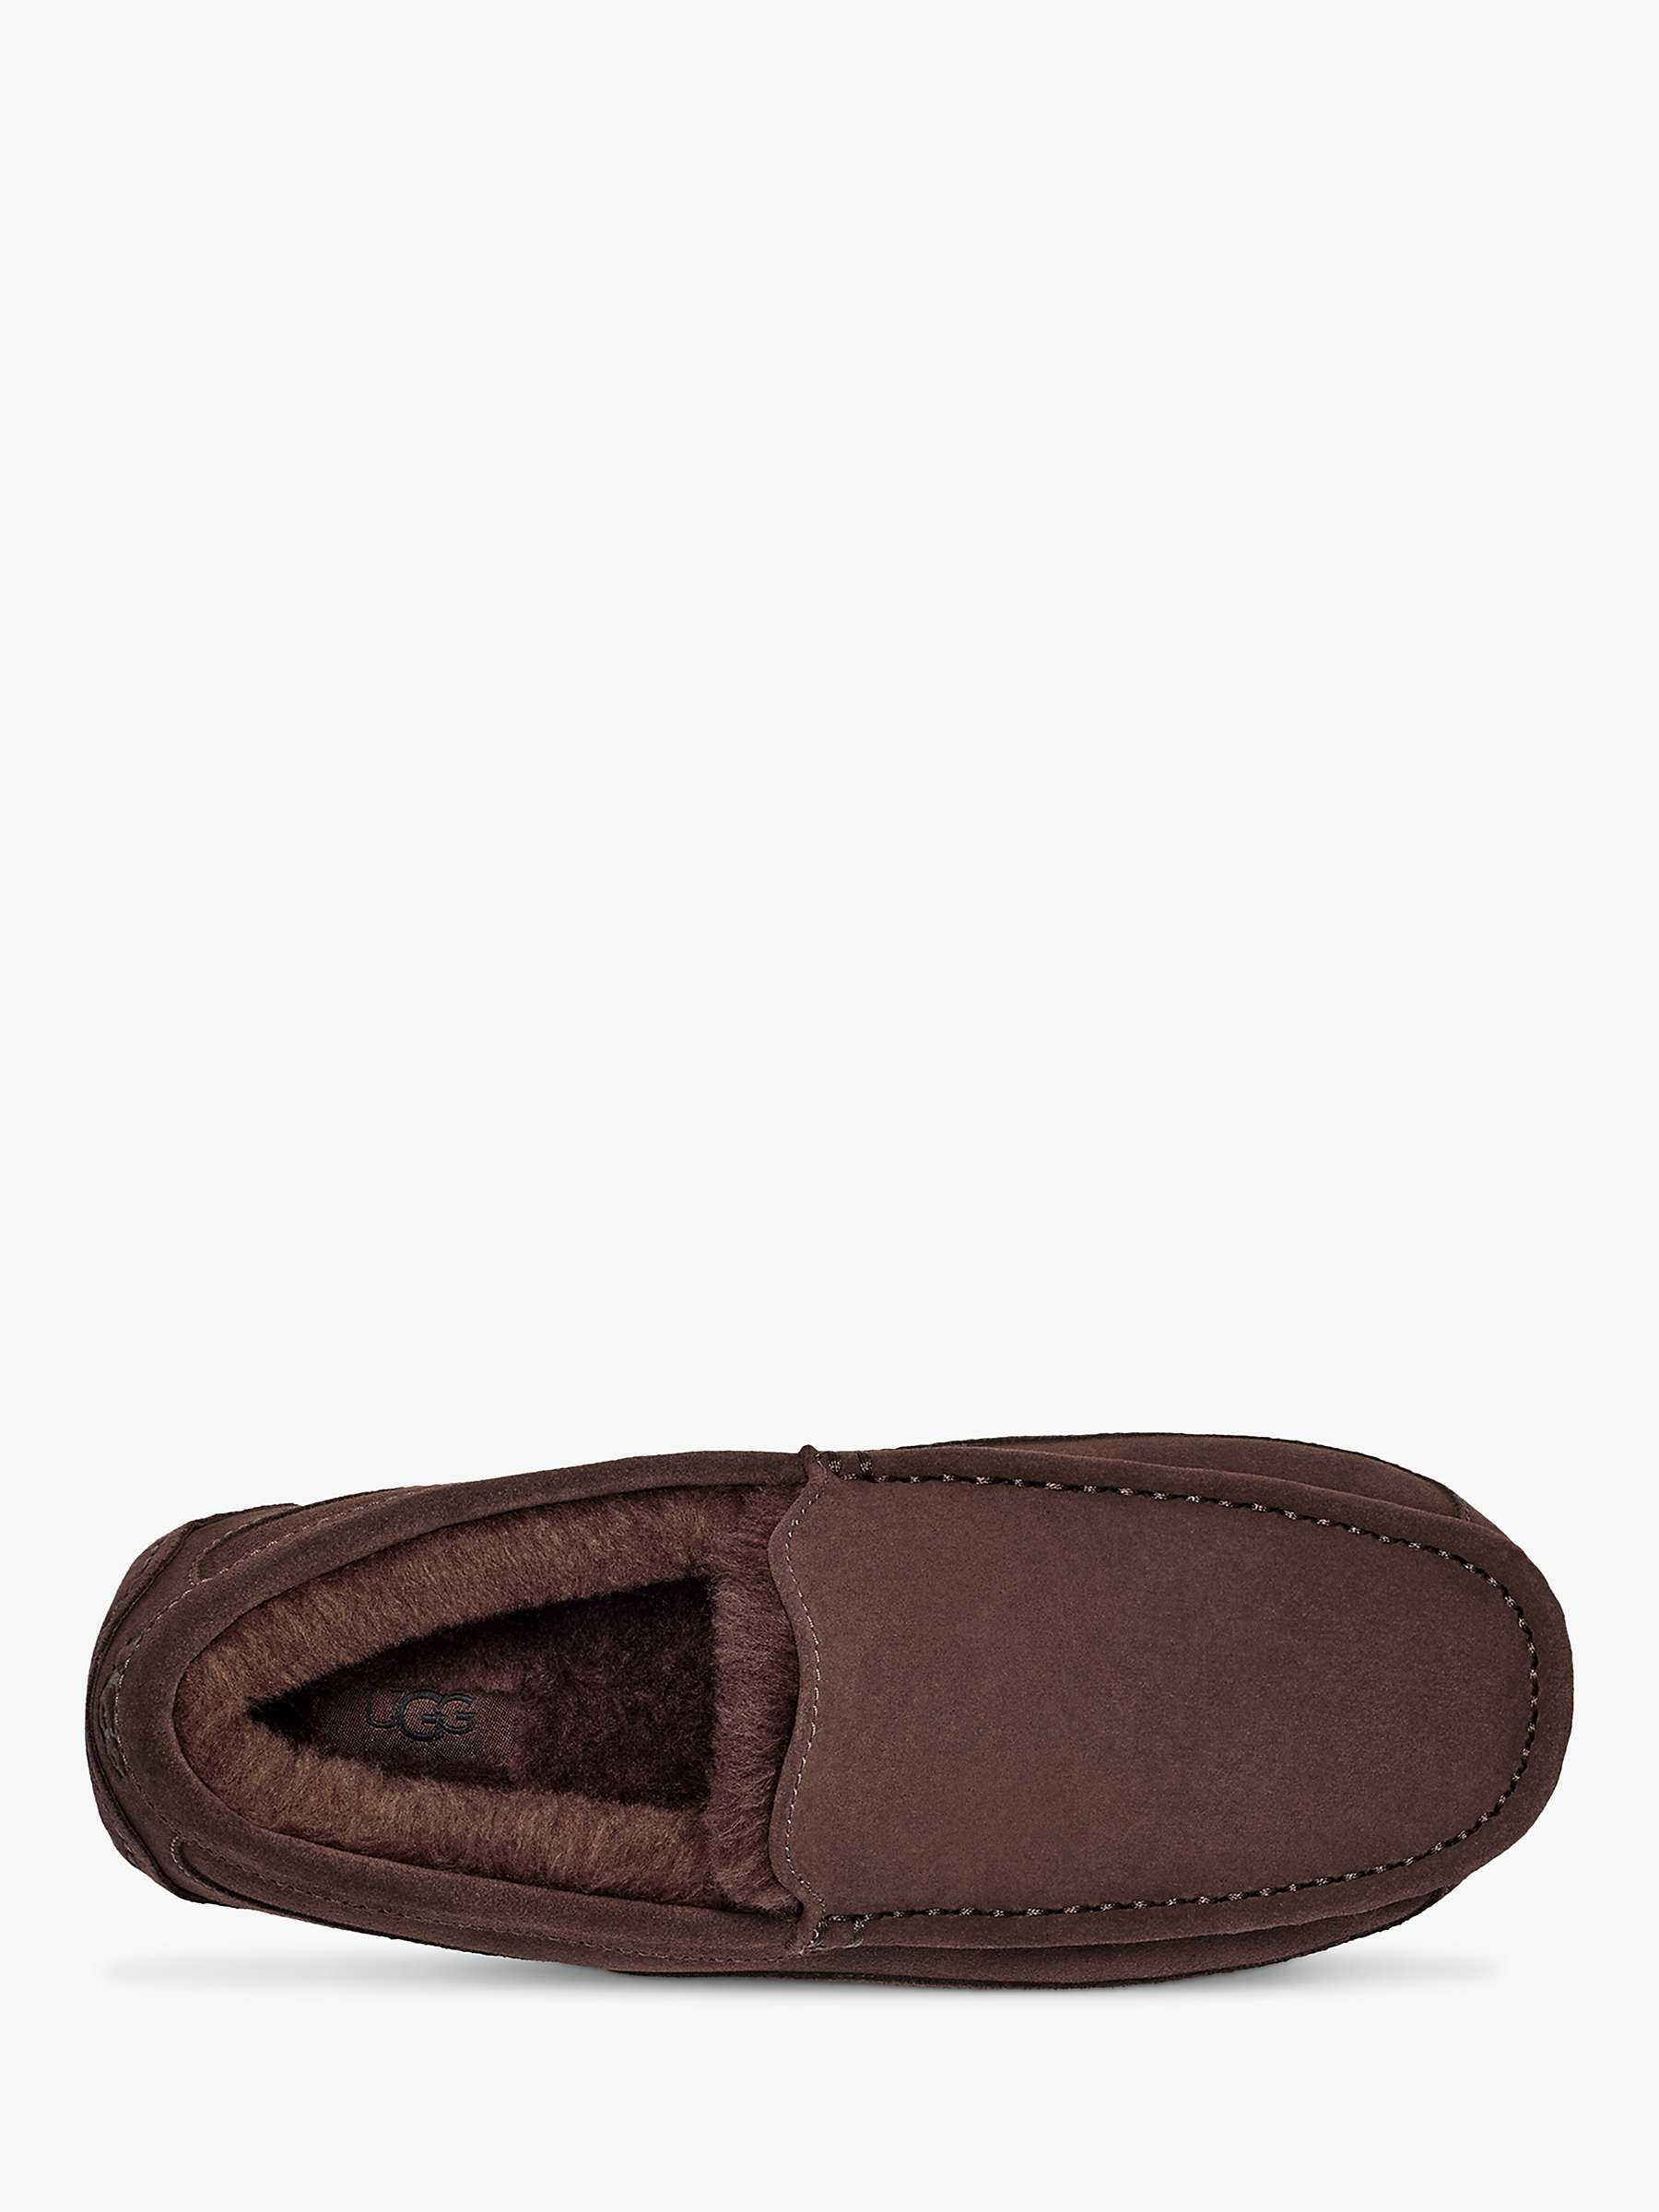 Buy UGG Ascot Moccasin Suede Slippers Online at johnlewis.com